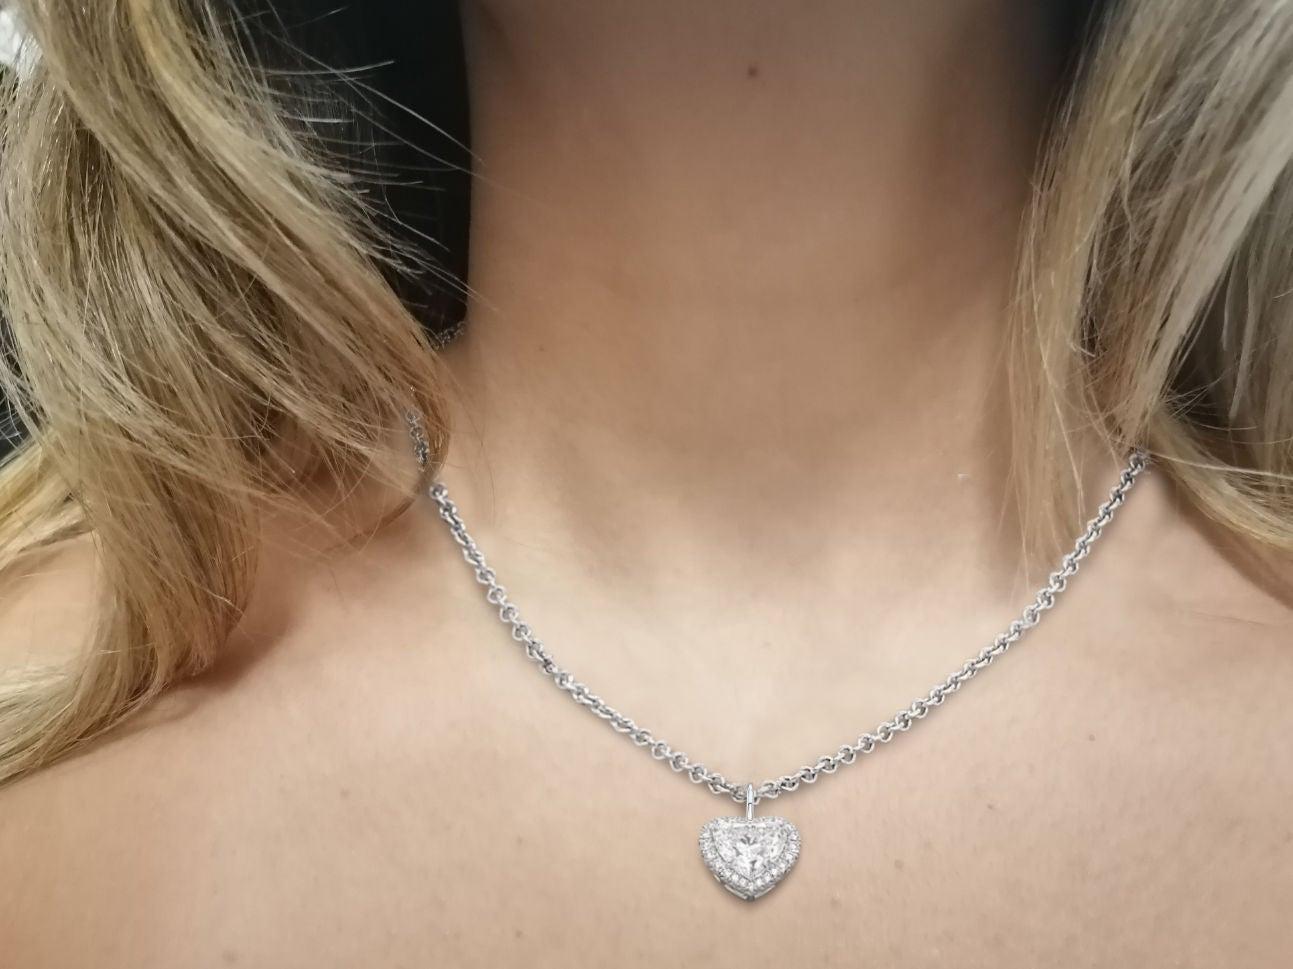 We present this magnificent pendant with a GIA certified heart shape diamond of 3.75 carats
Around this heart is a circle of round cut diamonds.
The total carat weight is approximately 3.75 carats.

The 18k white gold chain is included.